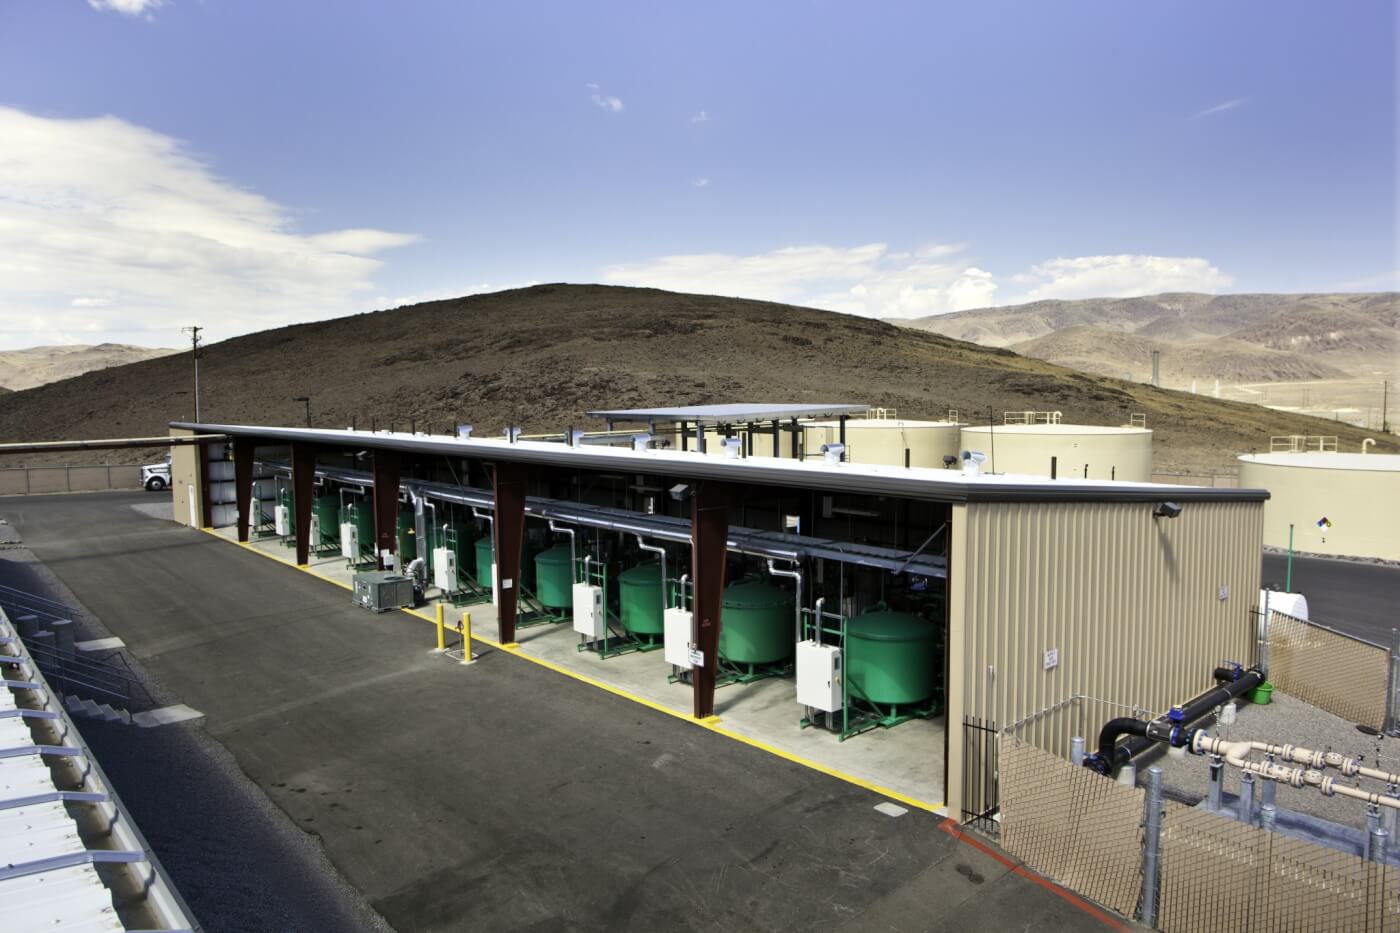 Two phases of GDiesel refineries have already been completed, both located in the foothills east of Reno.